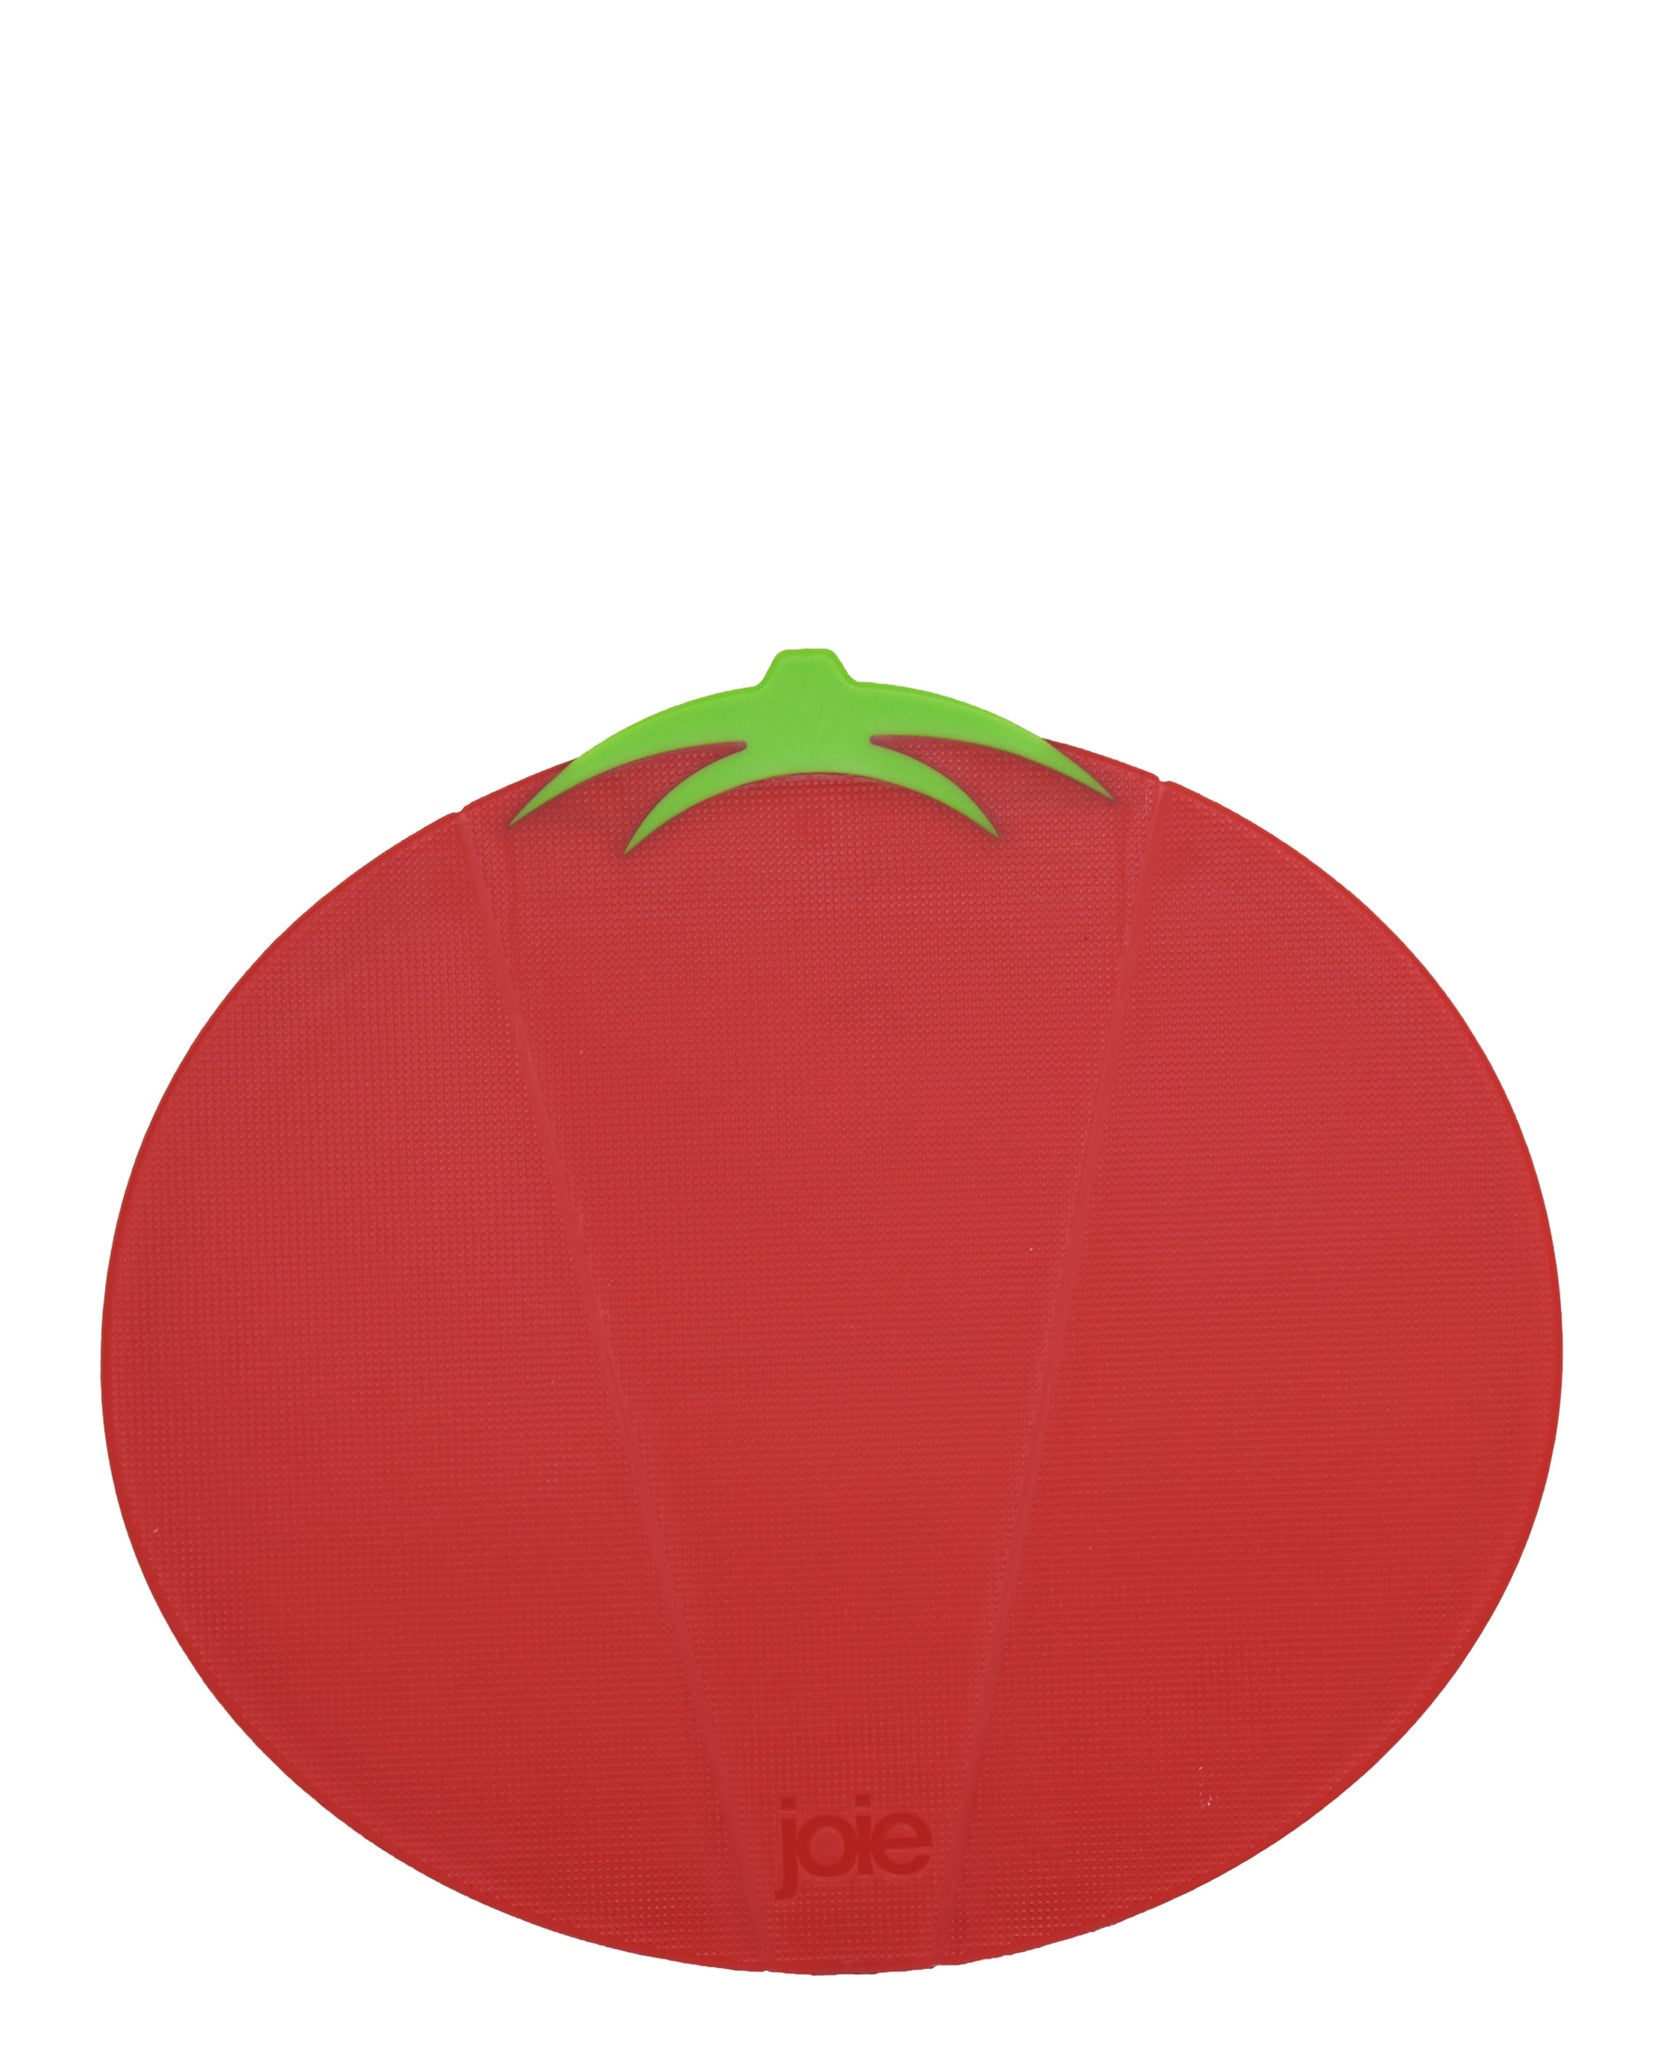 Joie Tomato Folding Cutting Board - Red